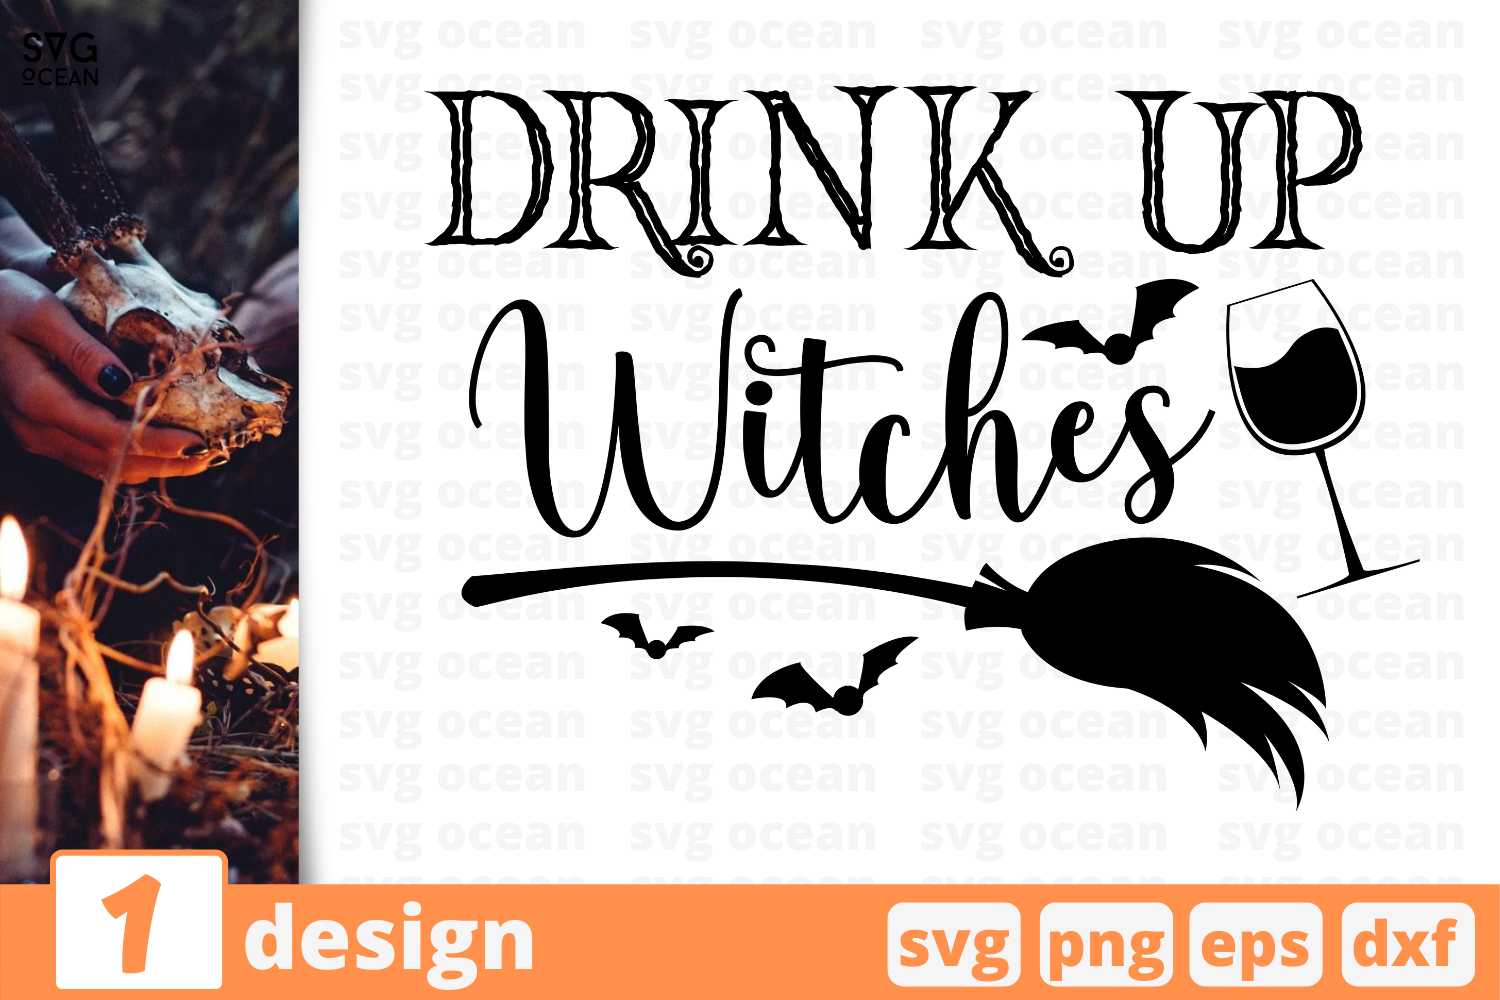 1 Drink Up Witches Halloween Quotes Cricut Svg By Svgocean Thehungryjpeg Com